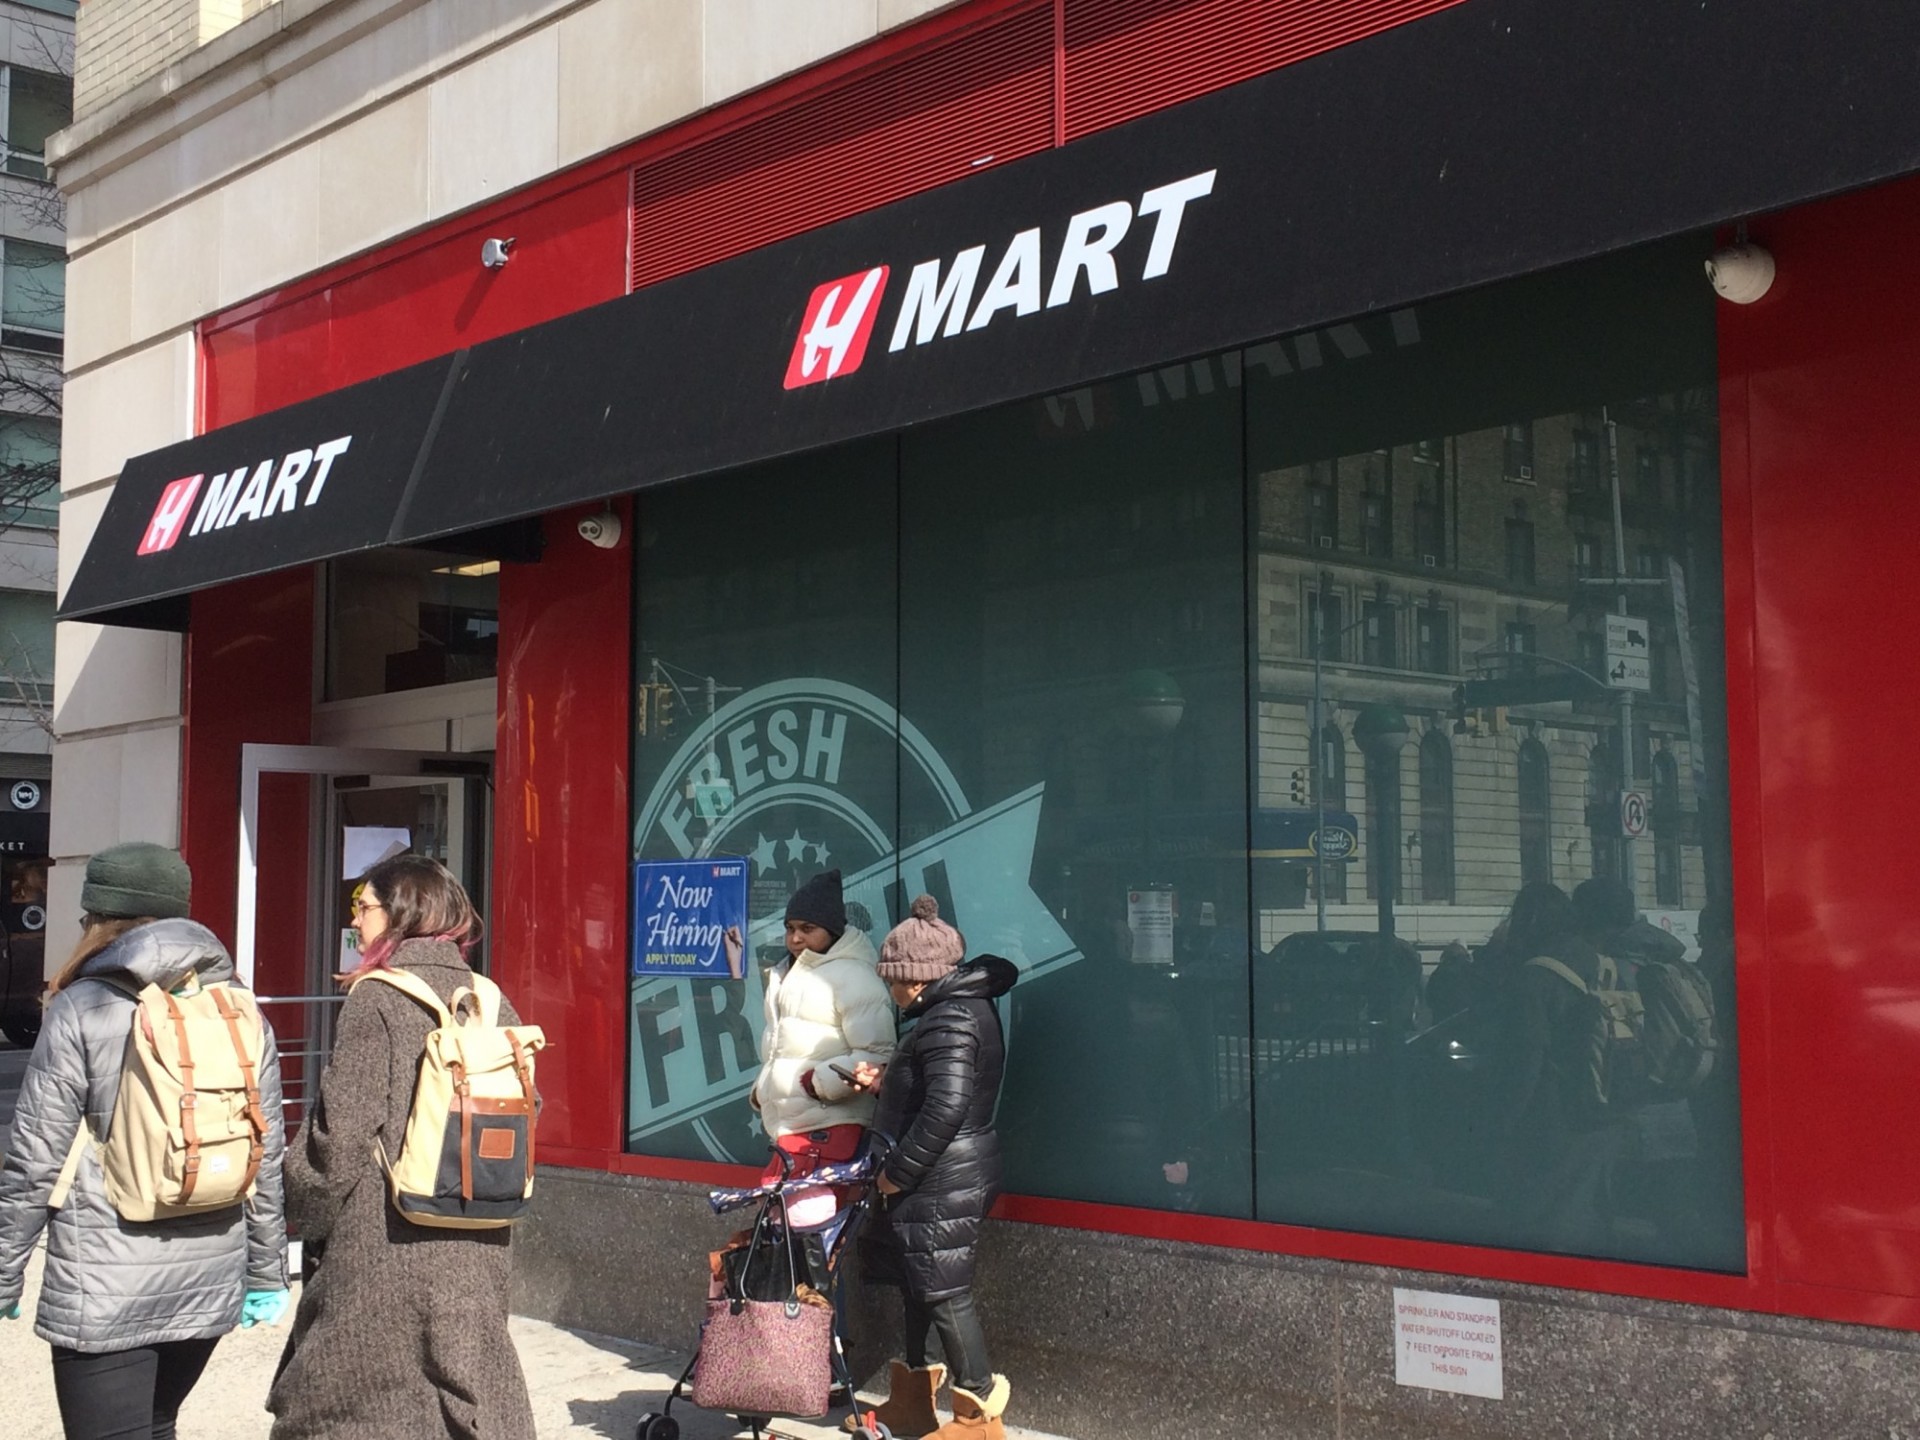 H Mart at 110th Street and Broadway is one of several new retail tenants opening in Columbia buildings in Morningside Heights